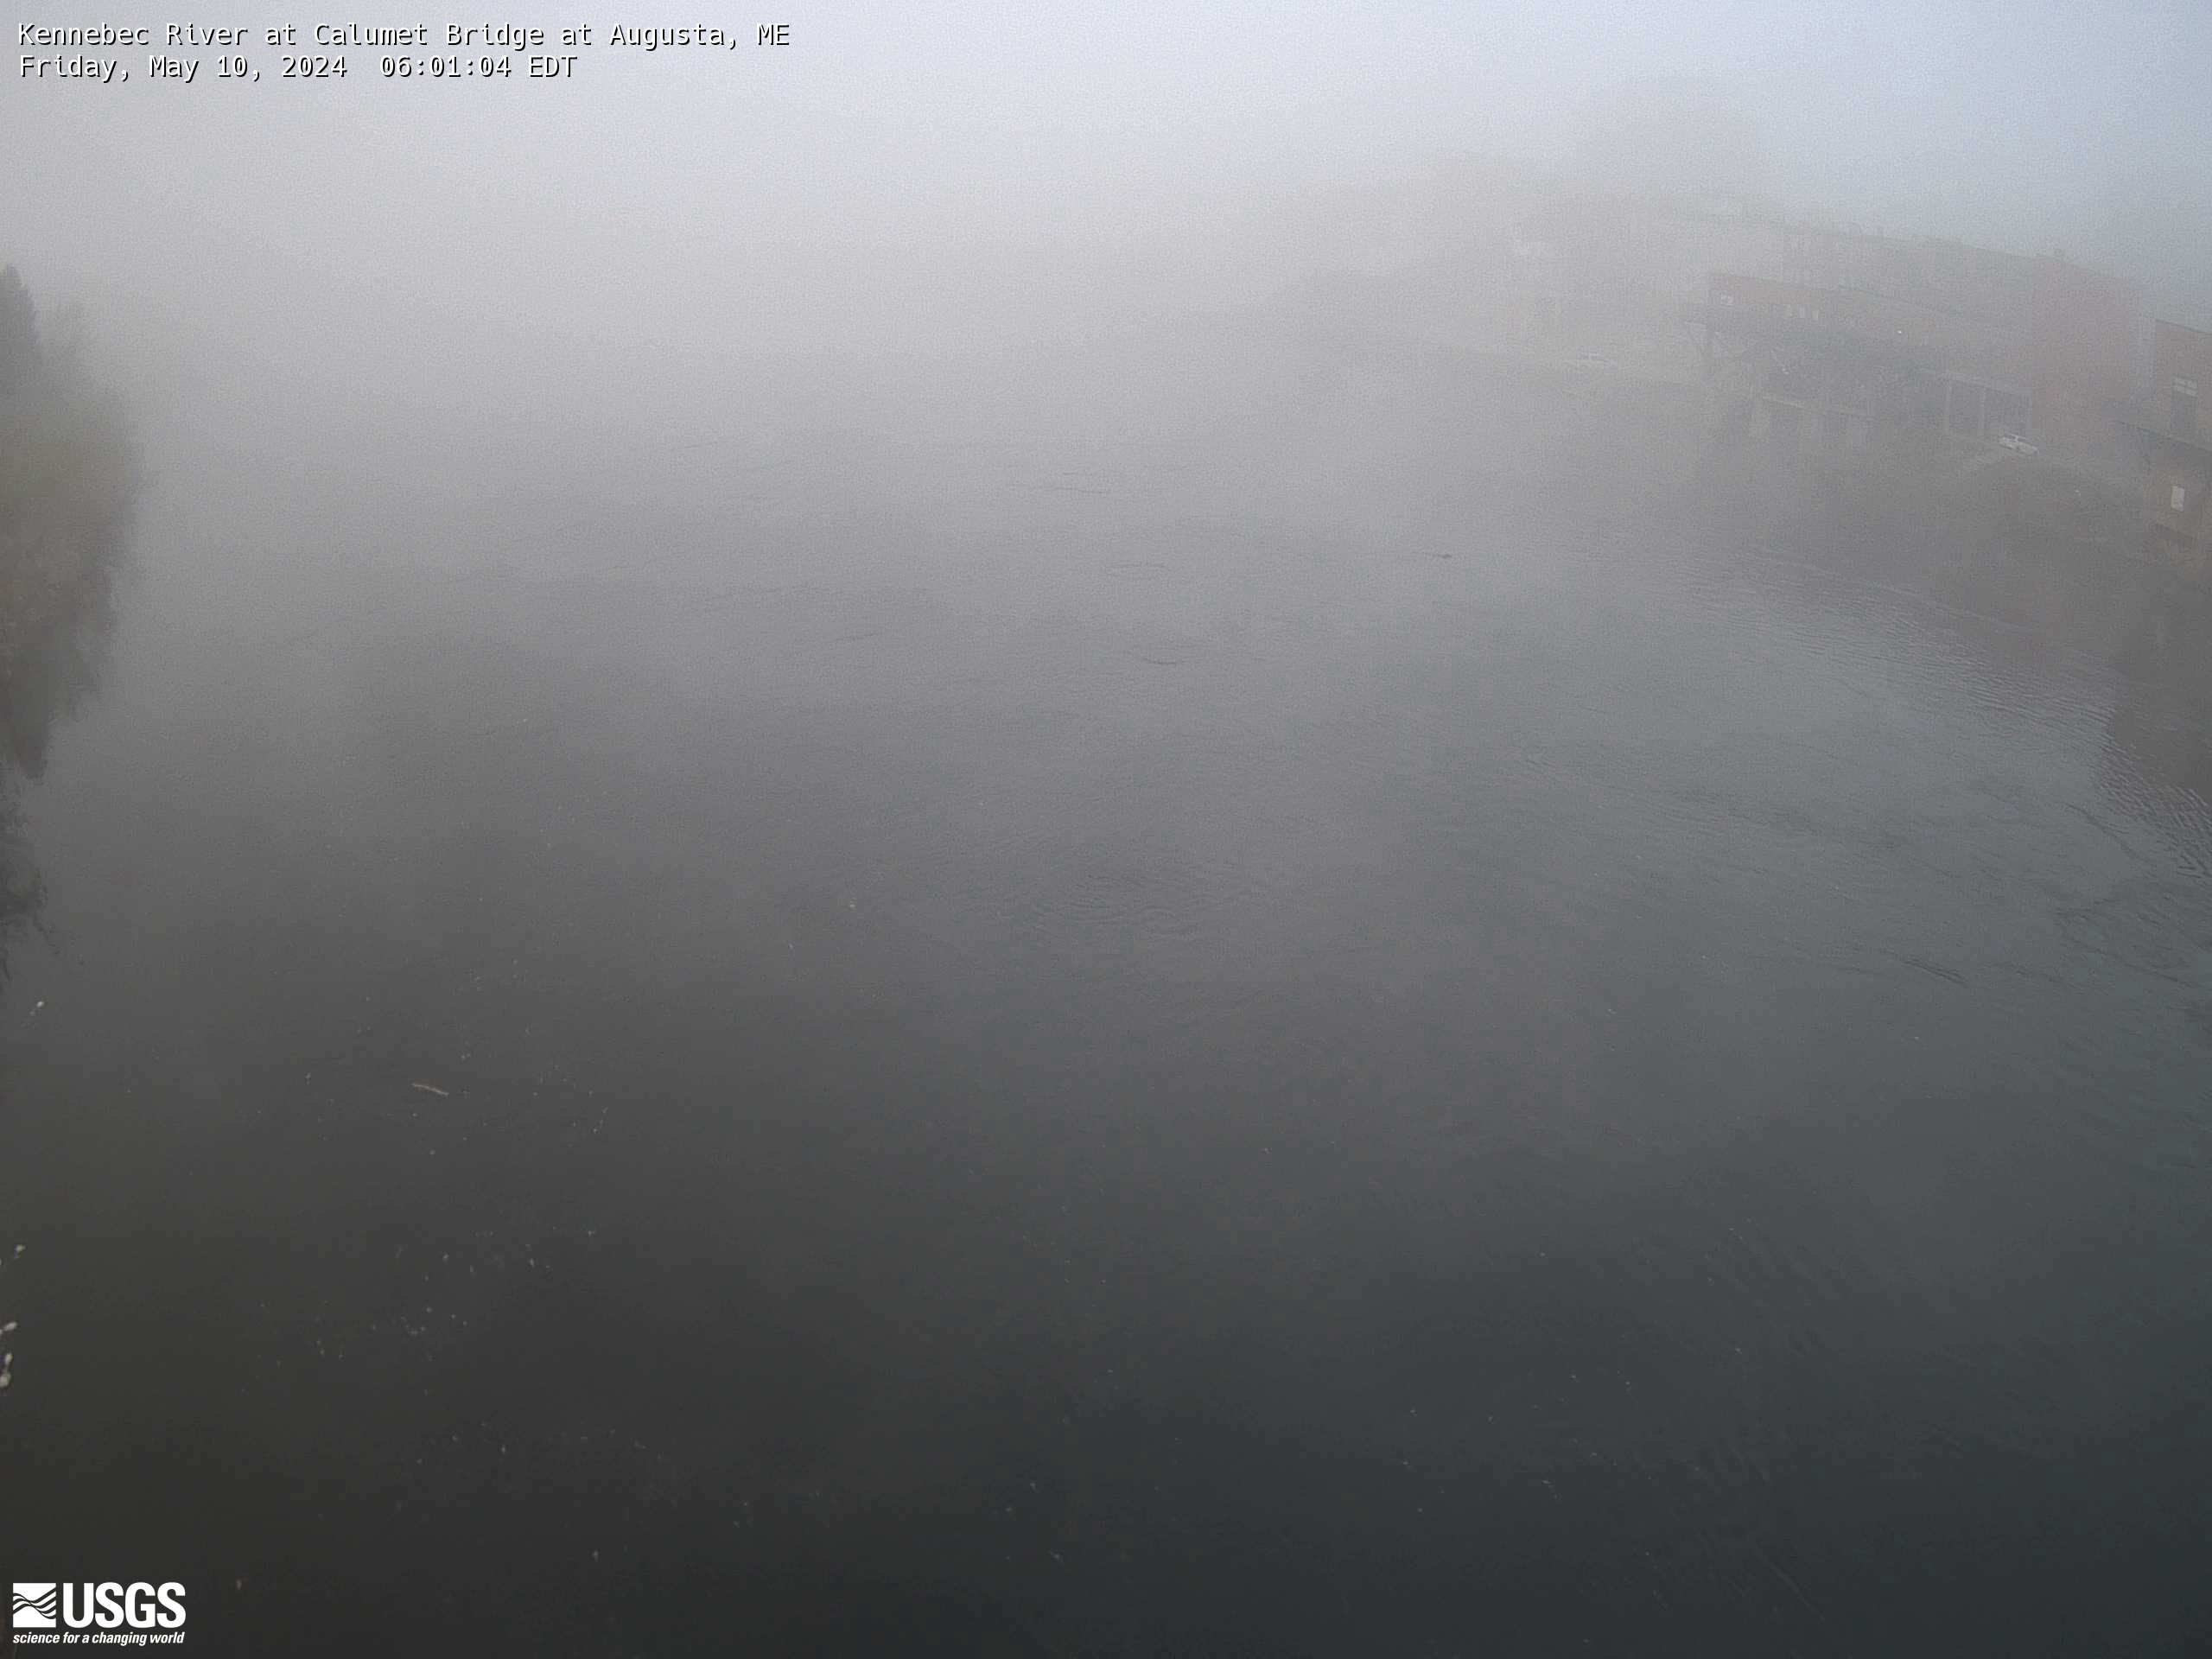 Recent image of the Kennebec River in downtown Augusta